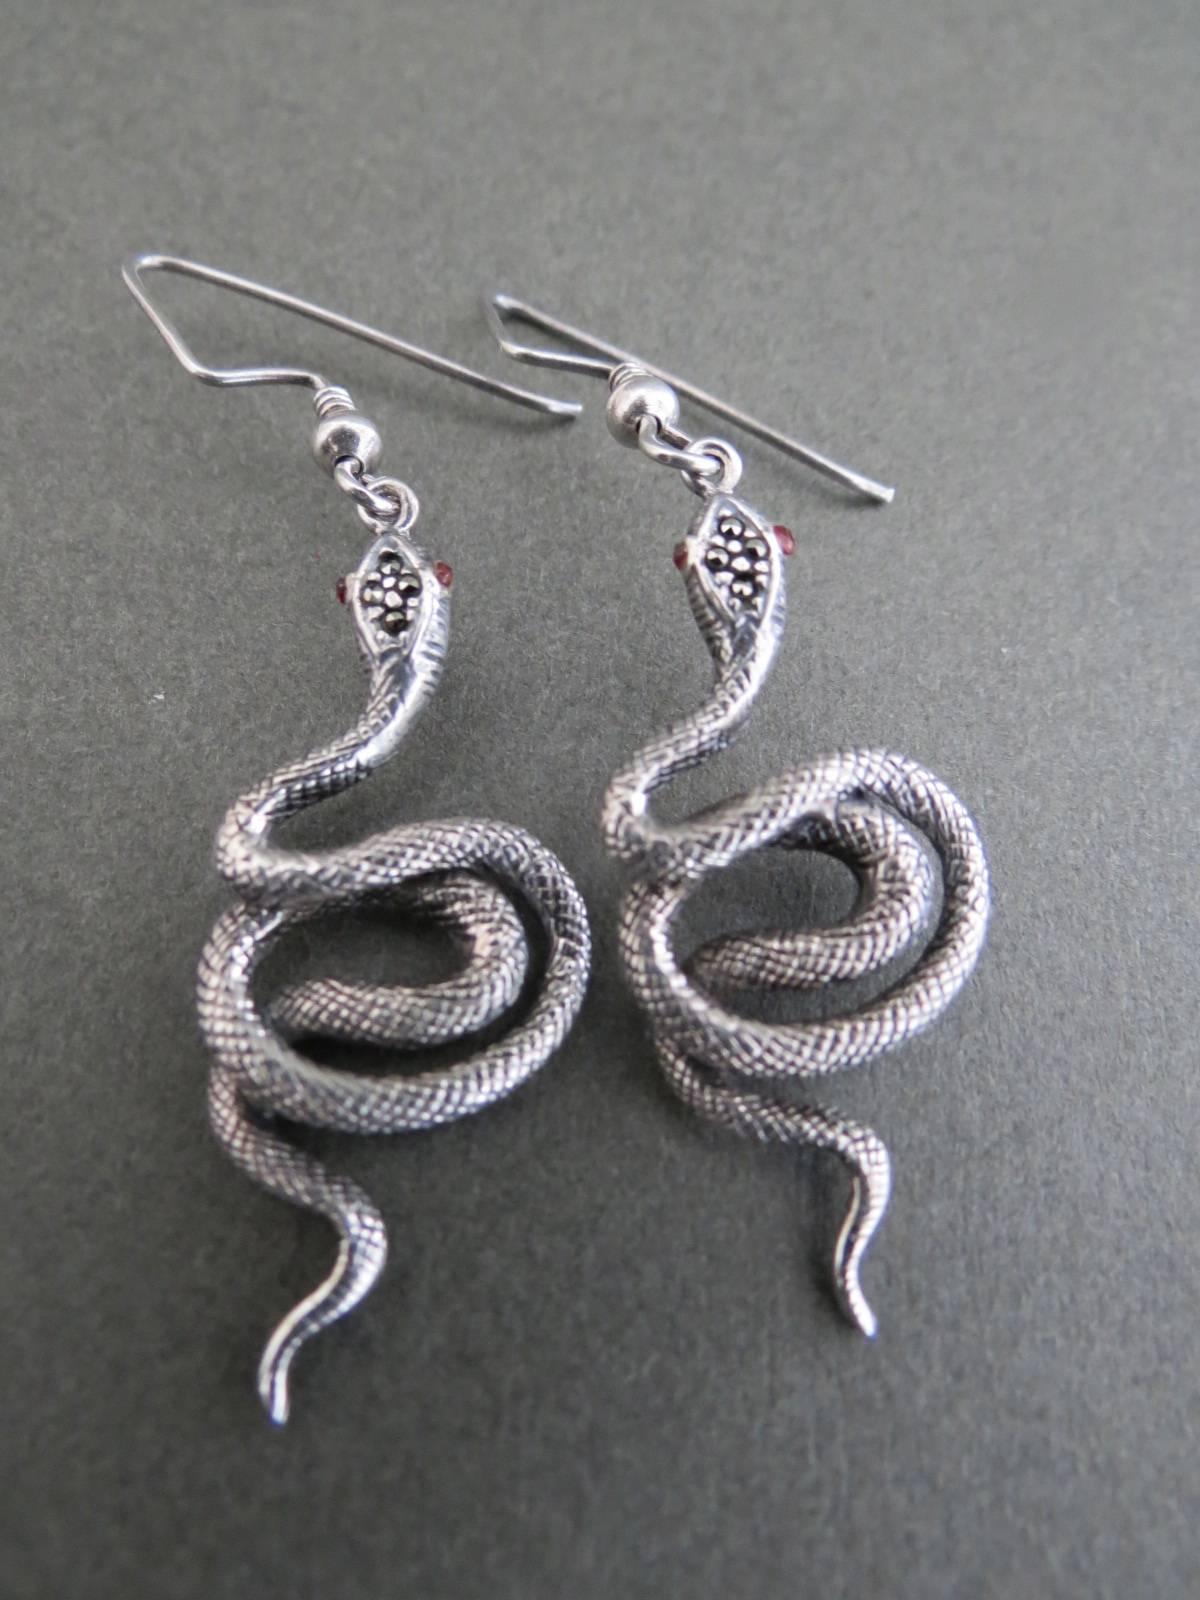 This vintage set of silver earrings would be lovely addition to your collection.
Item Specifics
Height: 6cm (approx 2.50